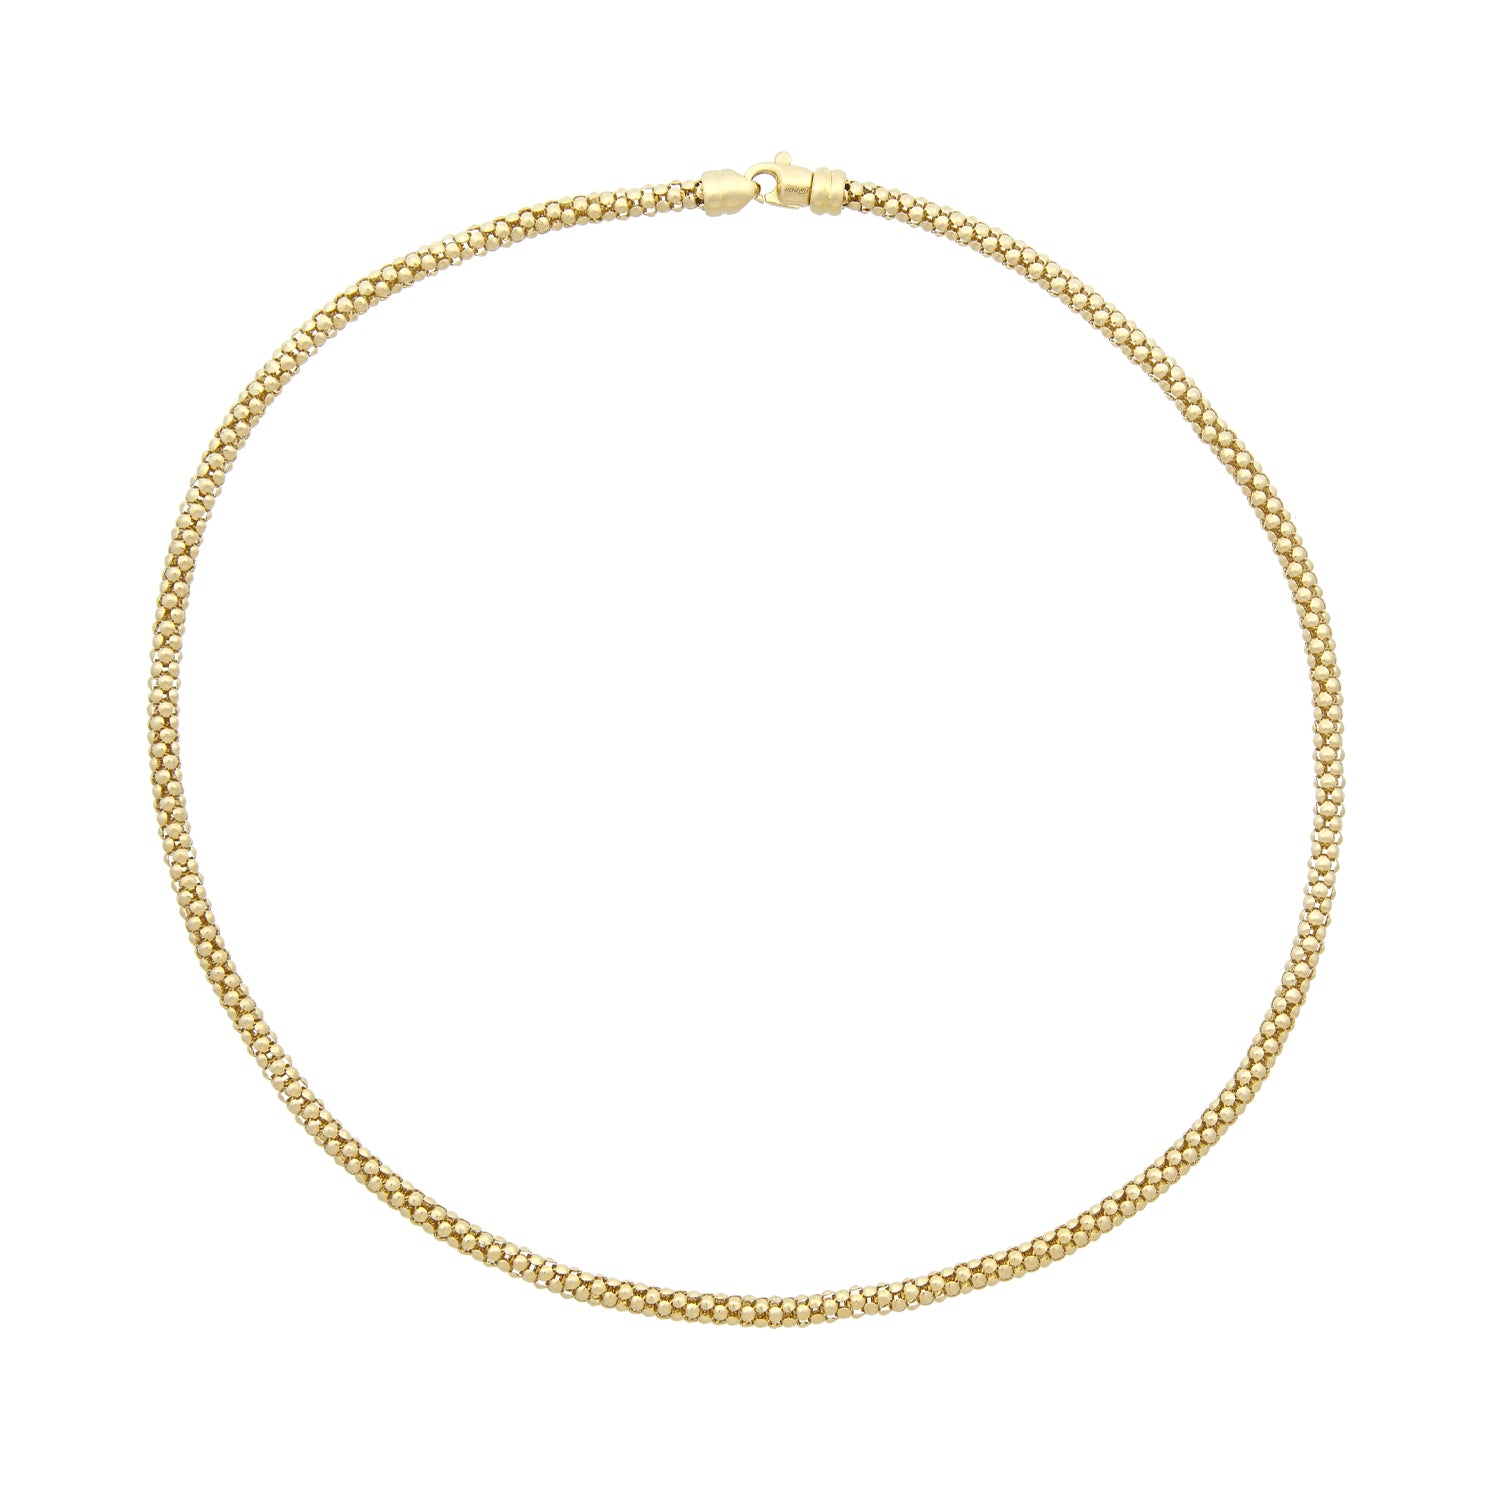 Yellow gold popcorn necklace